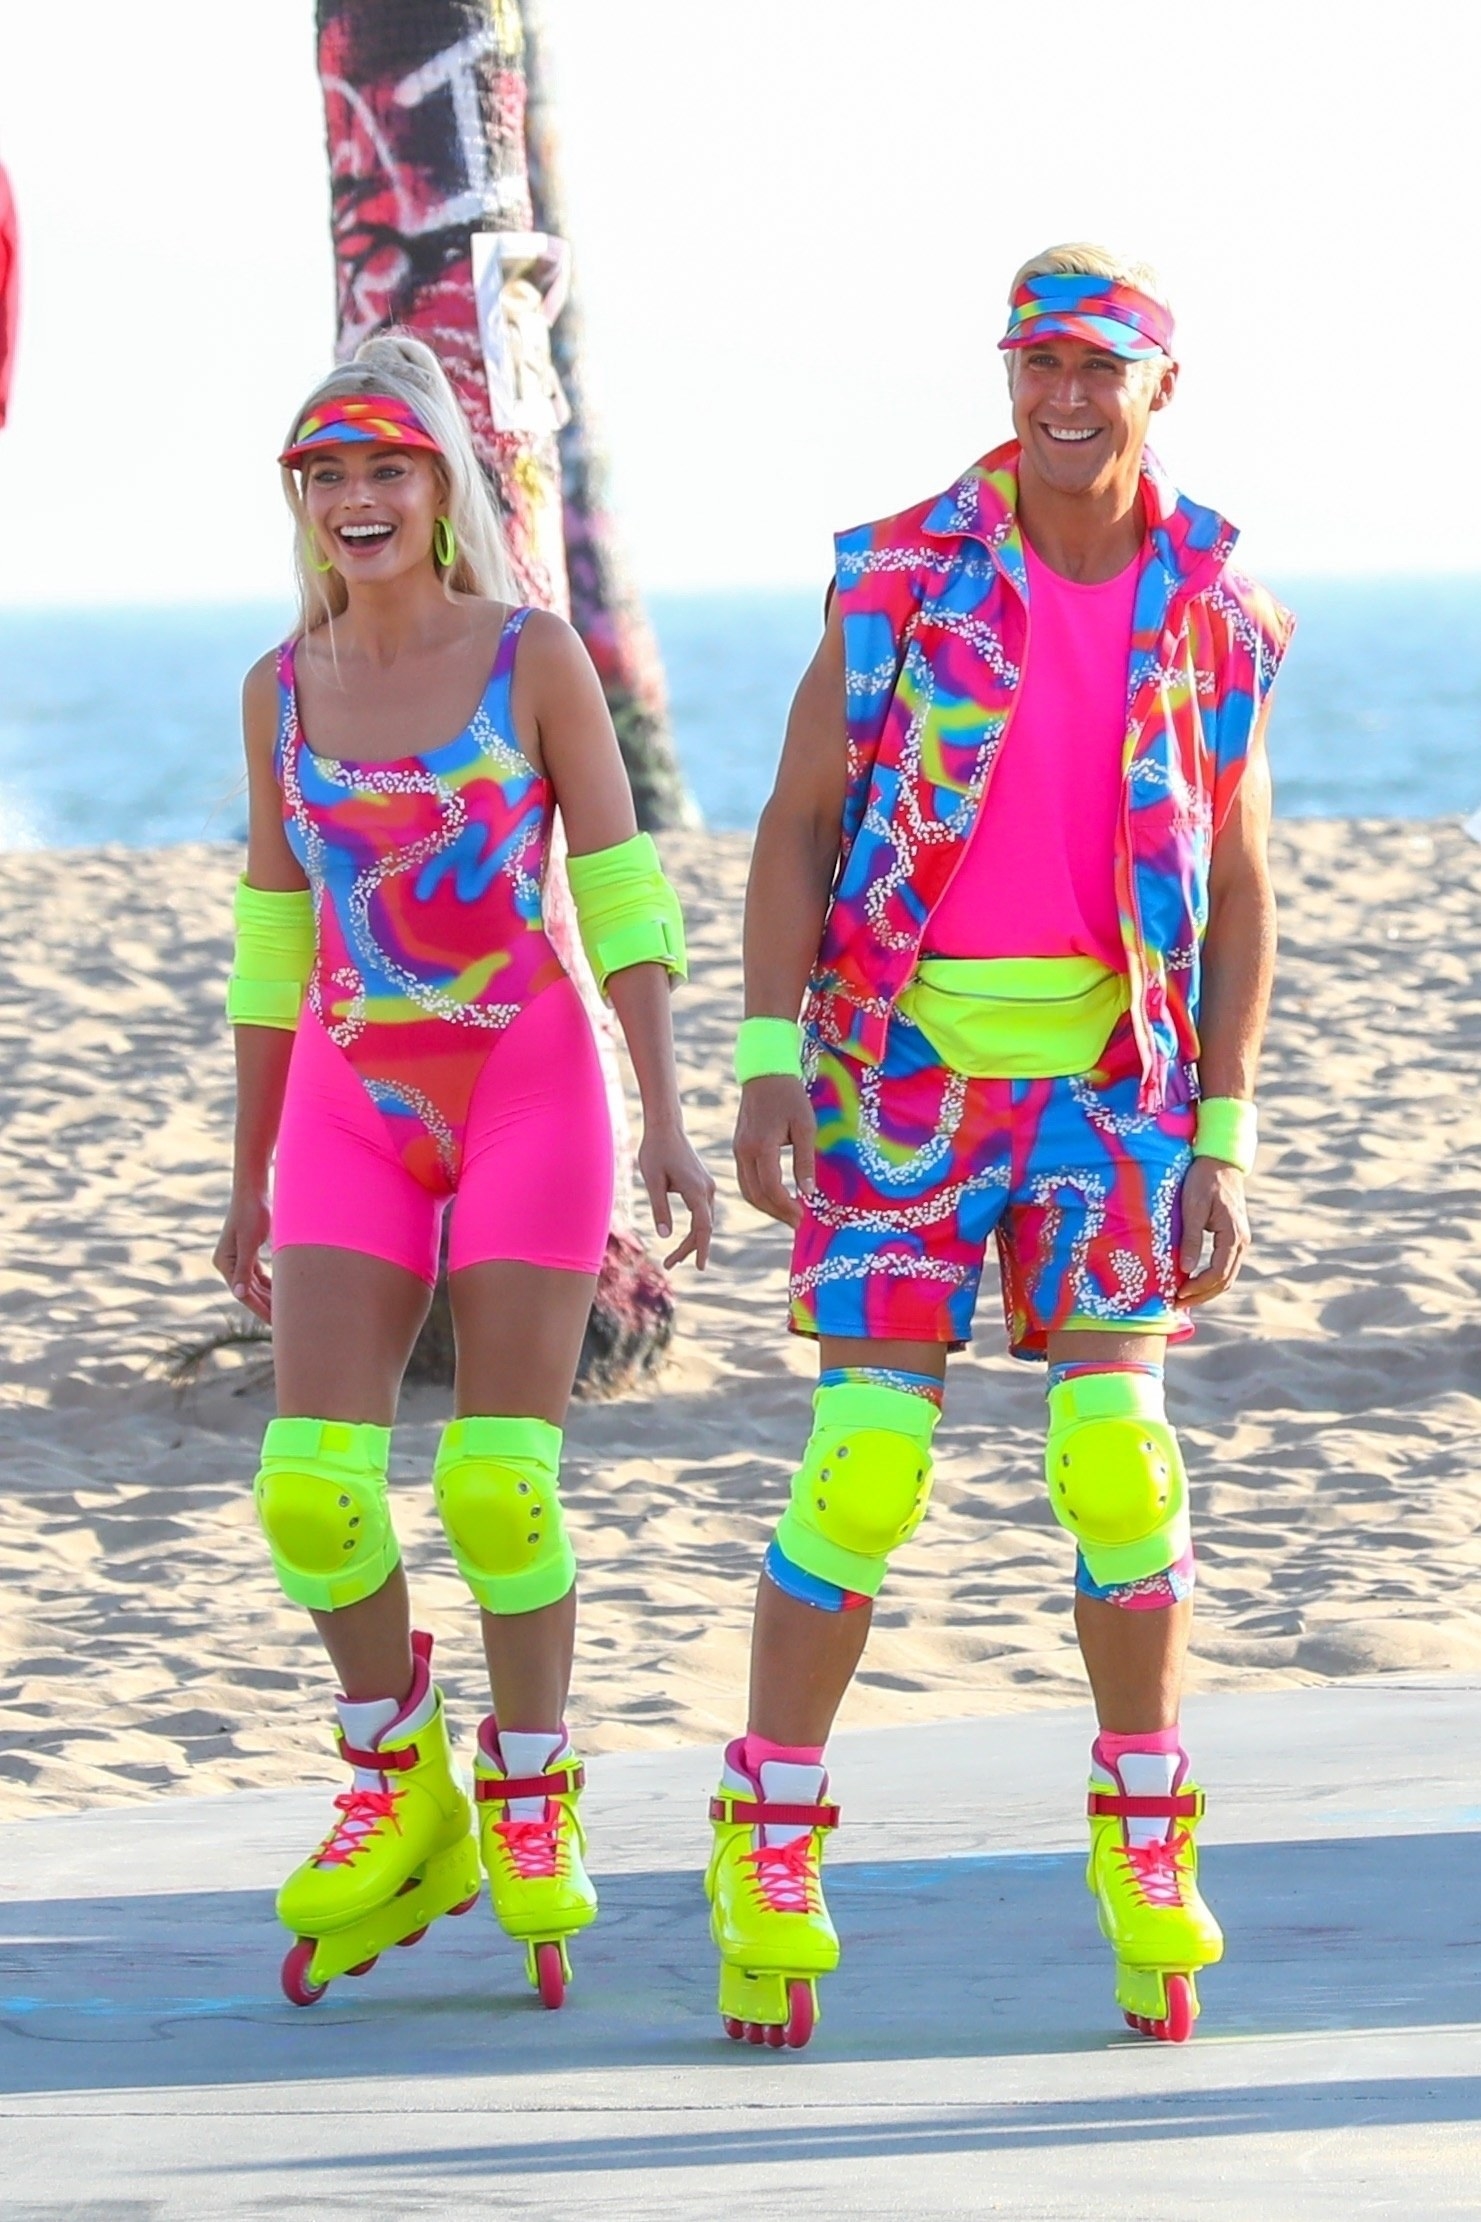 Ryan and Margot wearing matching outfits with bright colors that look like they&#x27;re from the &#x27;80s, as well as matching knee pads and rollerblades